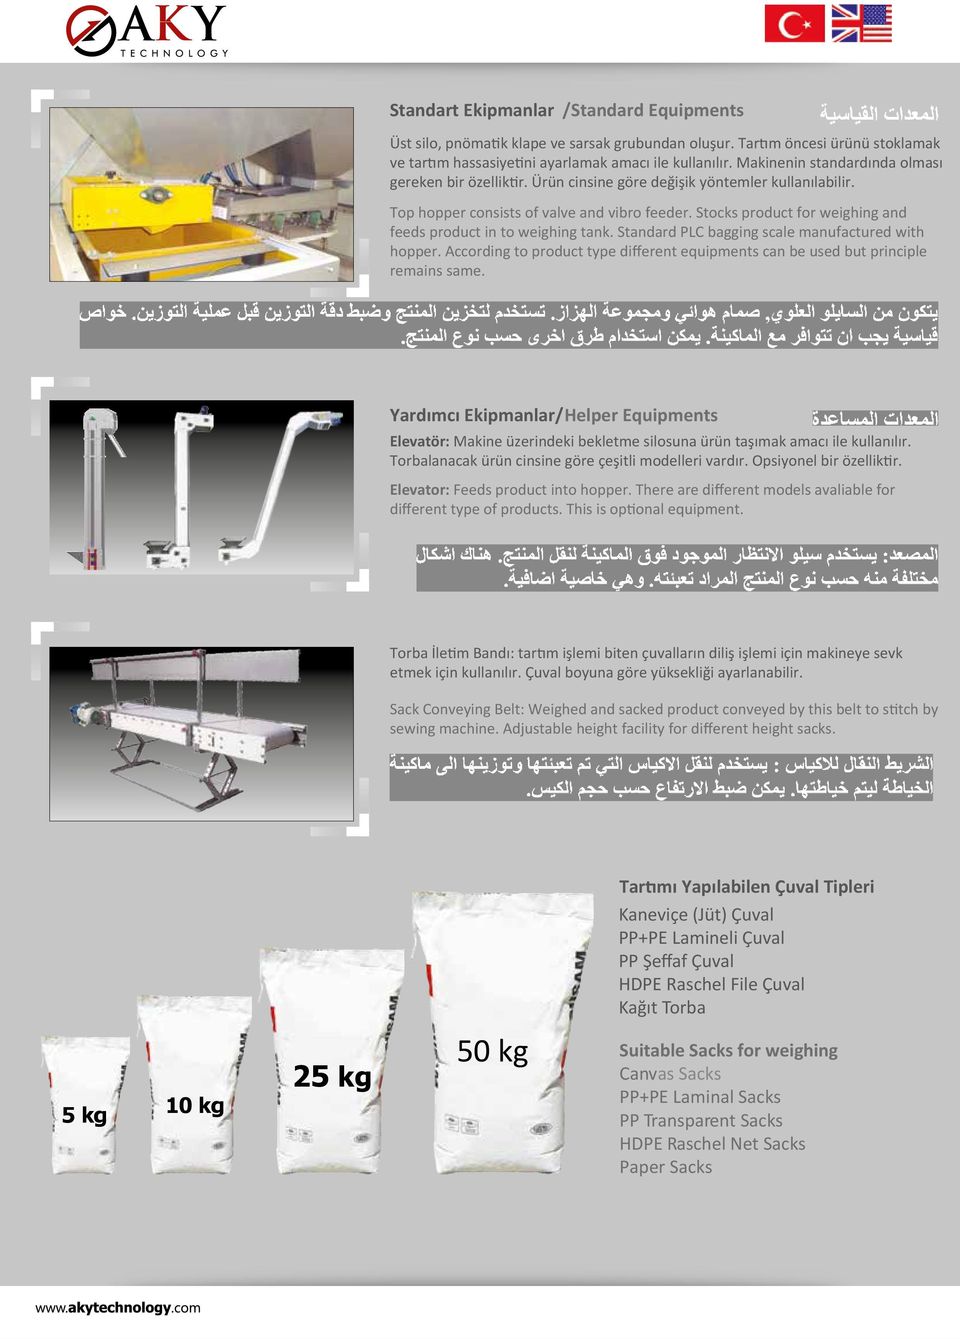 Stocks product for weighing and feeds product in to weighing tank. Standard PLC bagging scale manufactured with hopper.